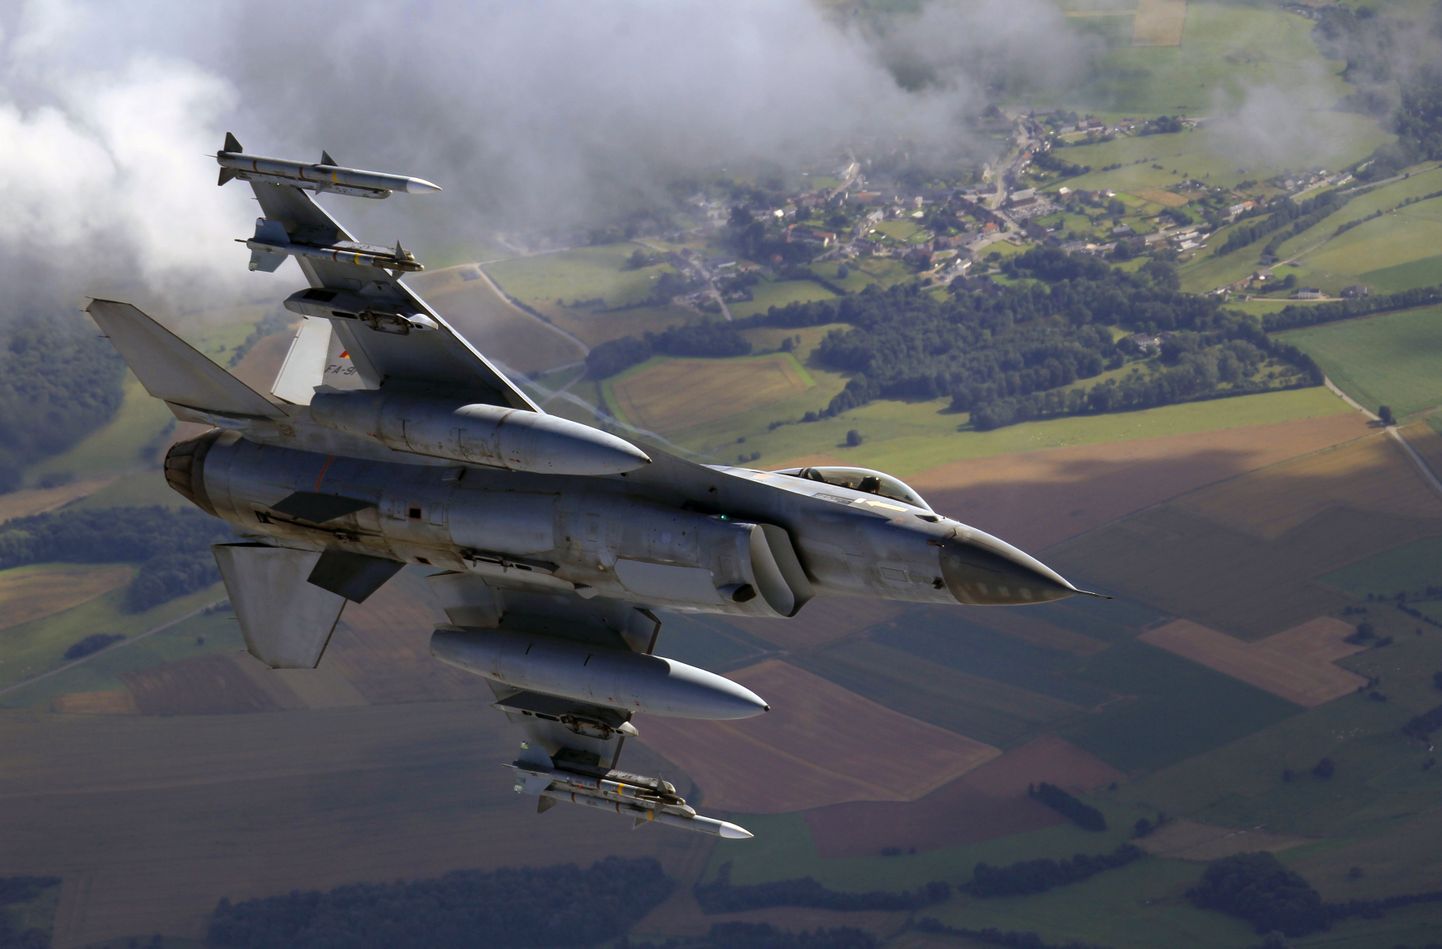 A Belgian Air Force F16 fighter aircraft flies over Belgium July 19, 2012, during a rehearsal for the country's National Day traditional military parade. Belgium will celebrate its 182nd anniversary of independence on National Day on July 21. REUTERS/Yves Herman (BELGIUM - Tags: MILITARY POLITICS)